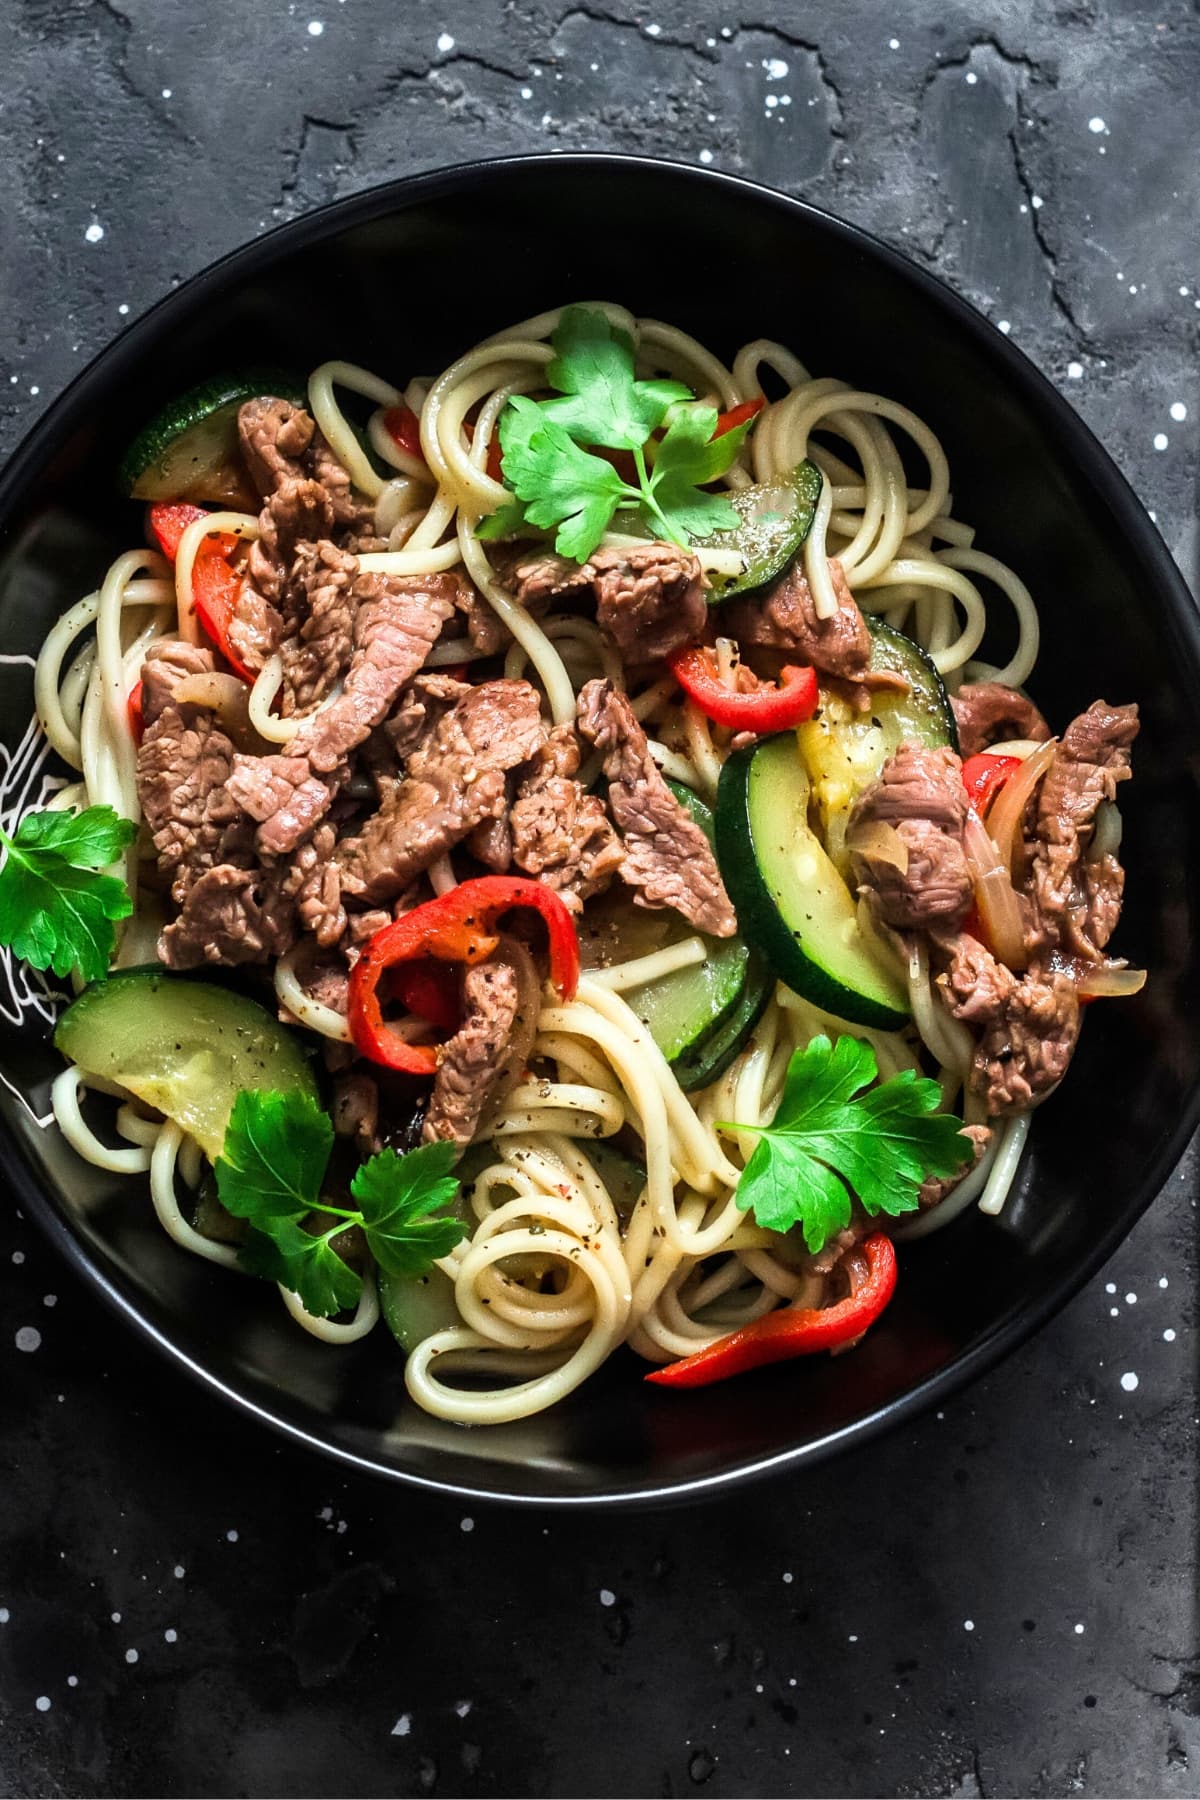 Bowl of Homemade Zucchini Noodles with Beef Steak and Bell Peppers